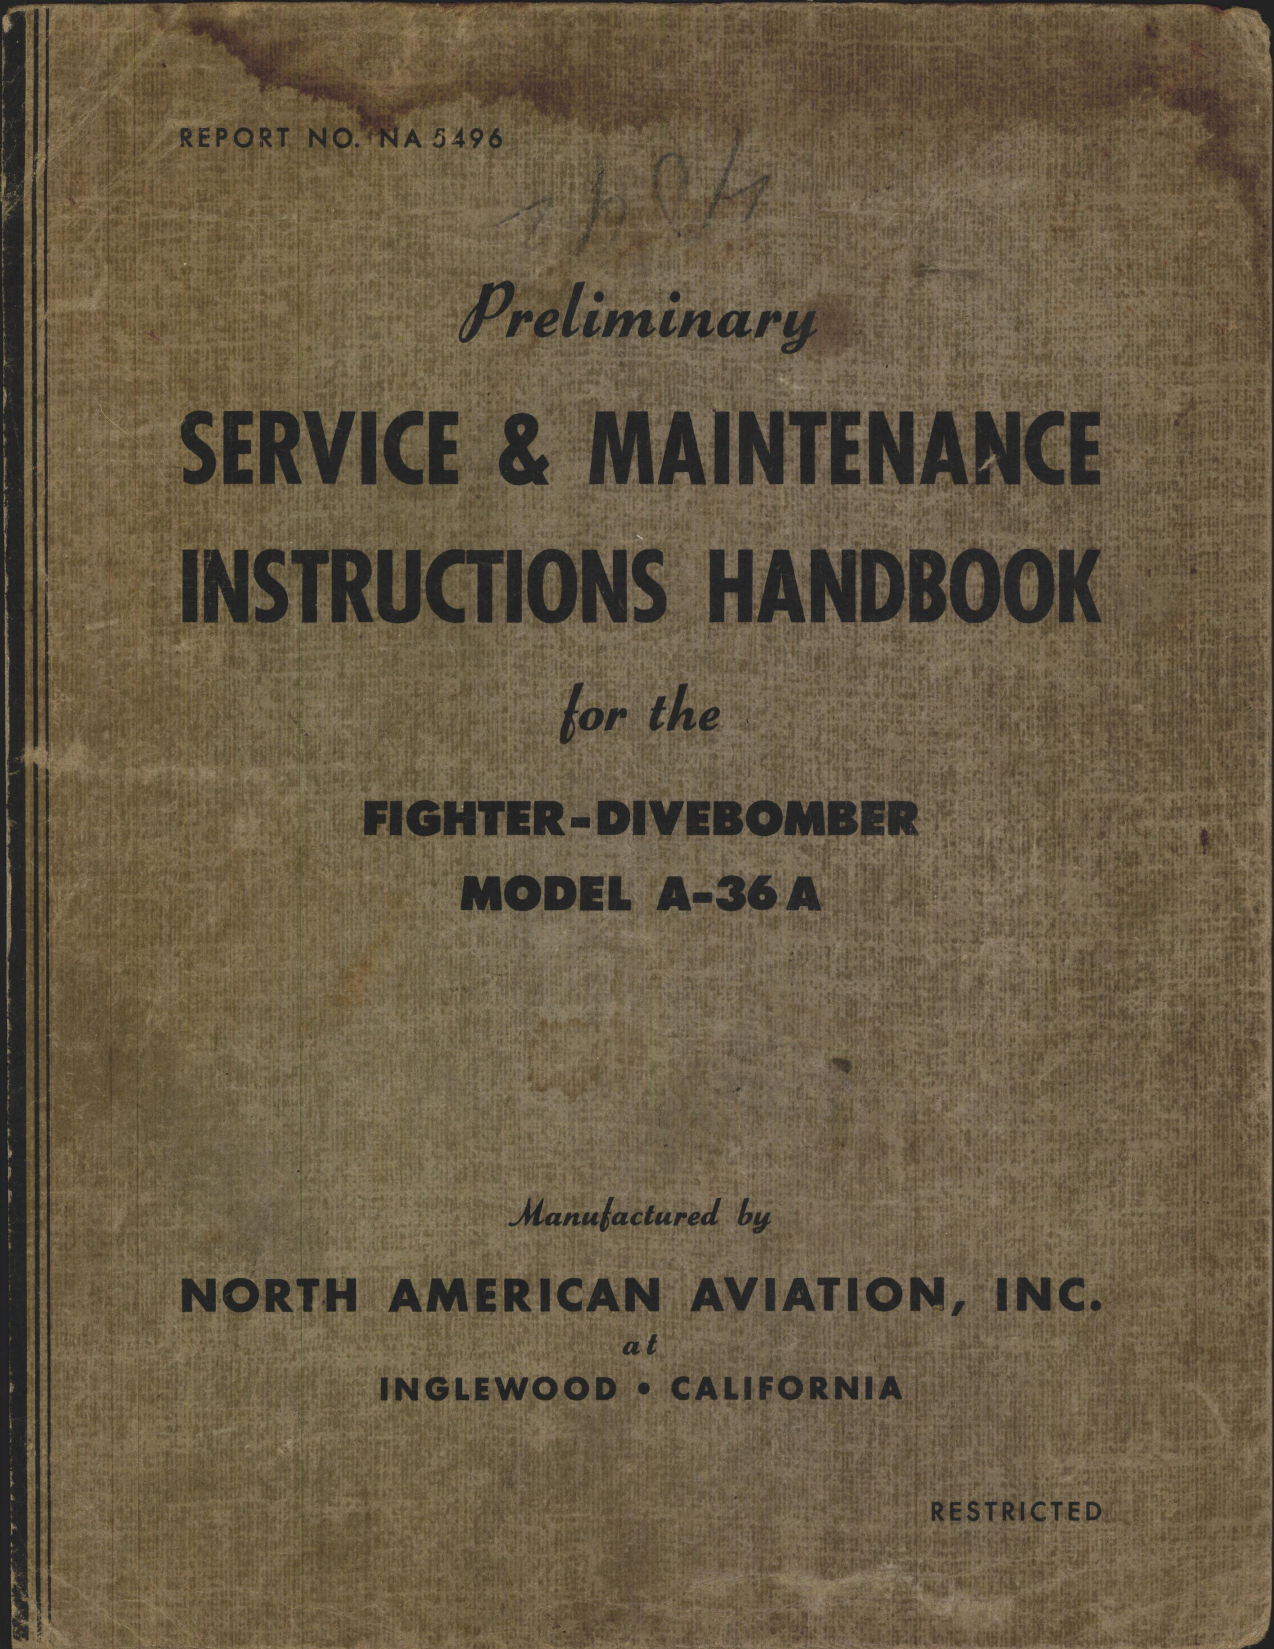 Sample page 1 from AirCorps Library document: Preliminary Service & Maintenance Instructions Handbook for the Fighter-Divebomber Model A-36A